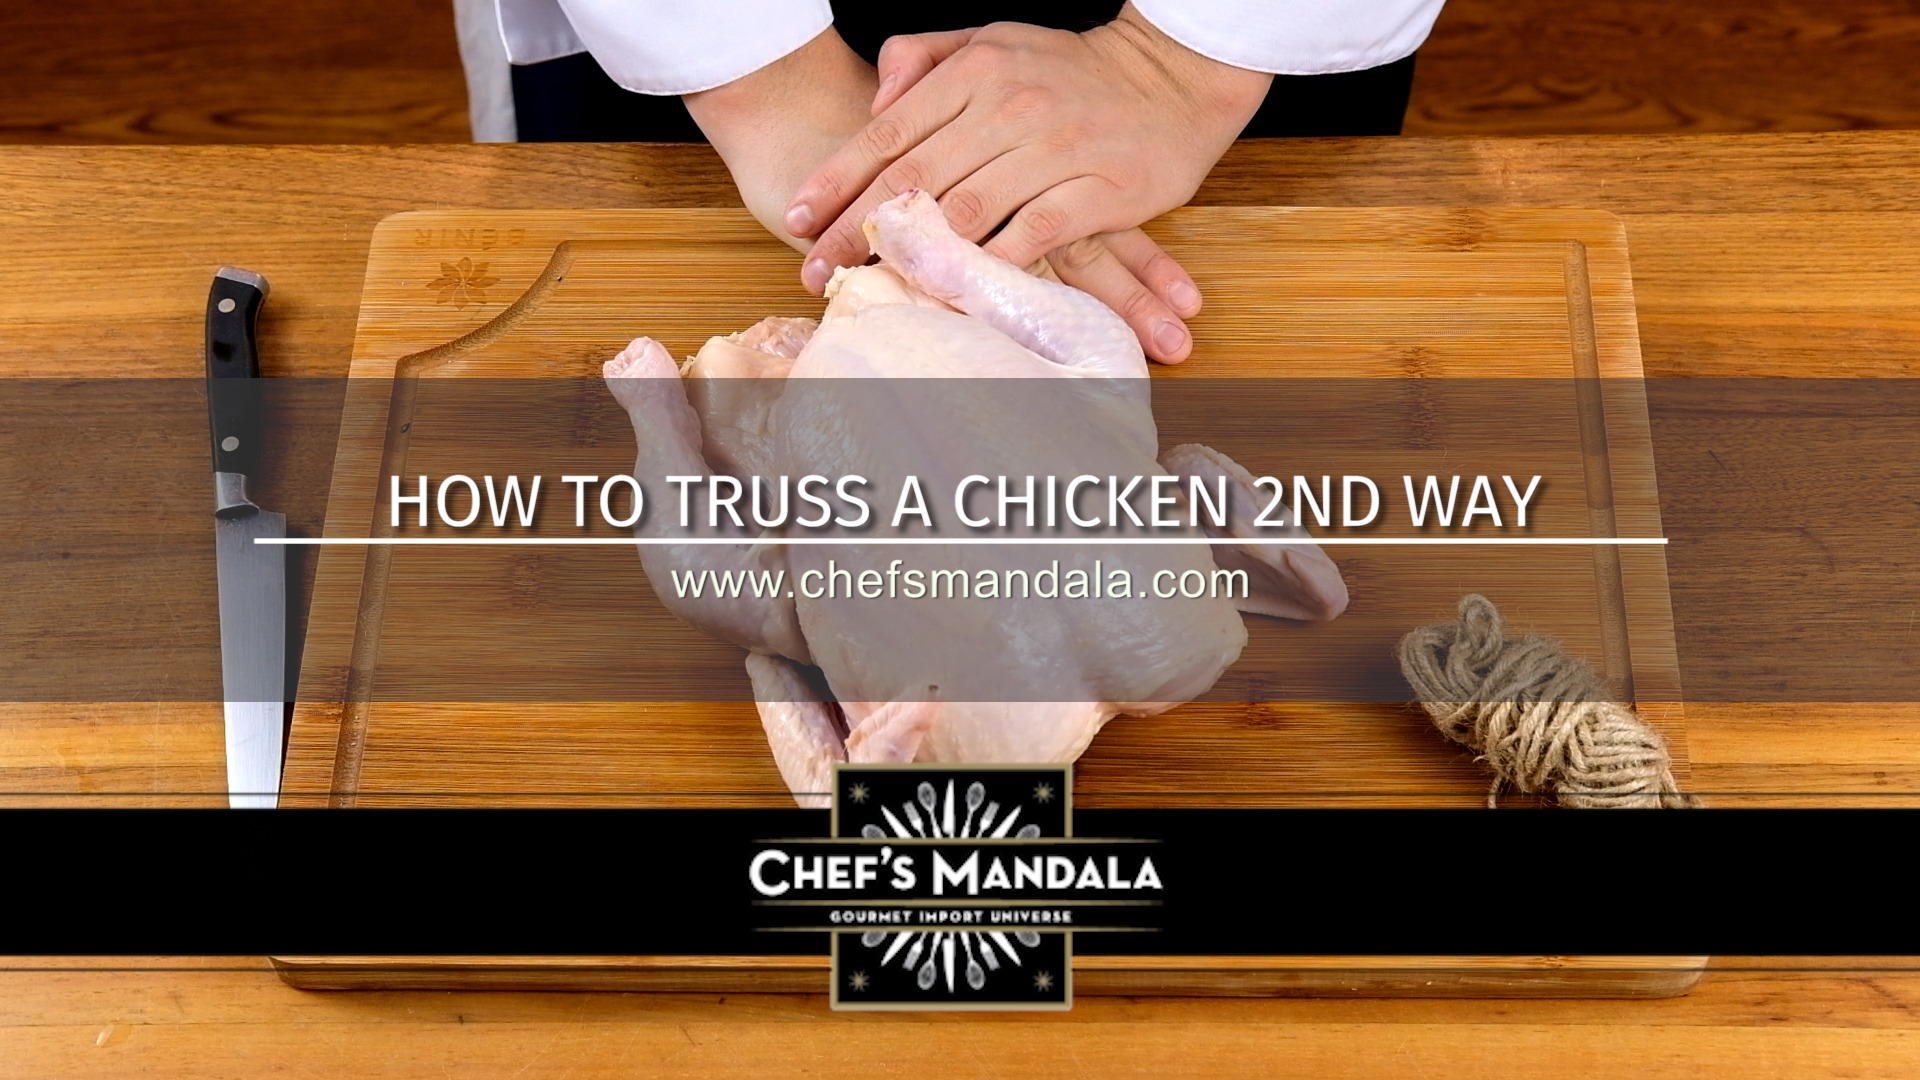 HOW TO TRUSS A CHICKEN 2ND WAY